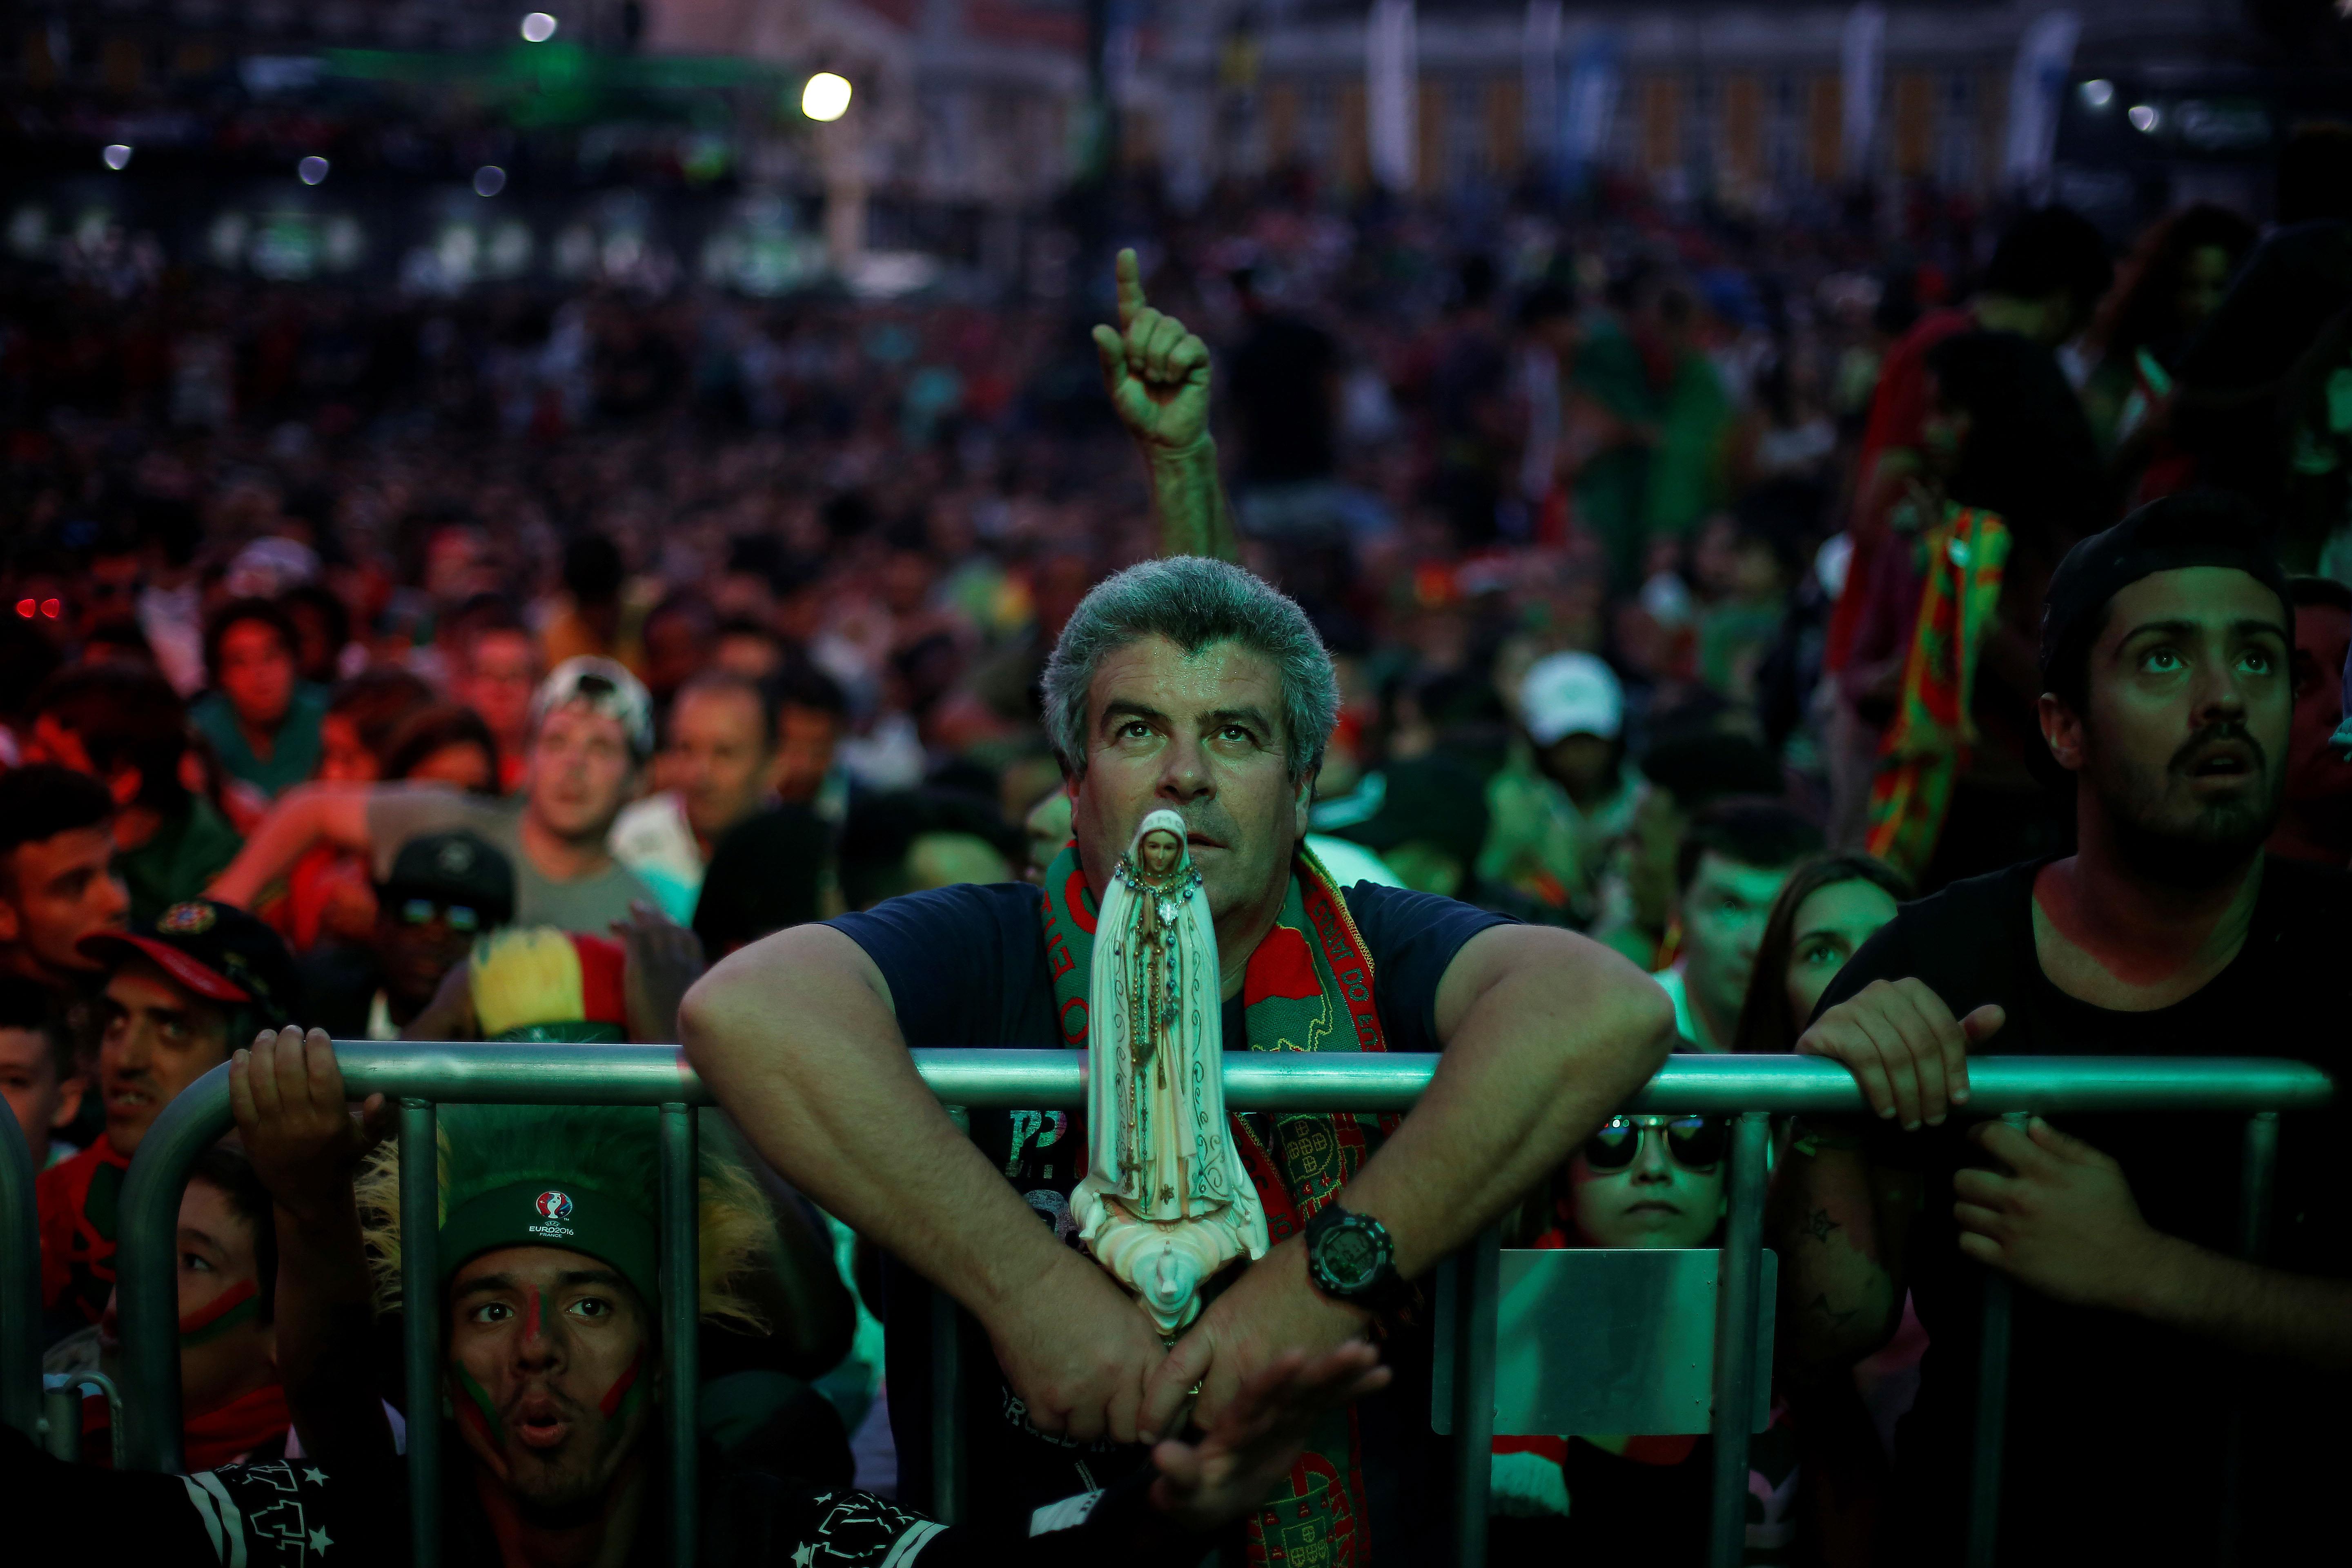 A fan of Portugal holds a statue of Fatima's virgin as they watch the Euro 2016 match between Portug